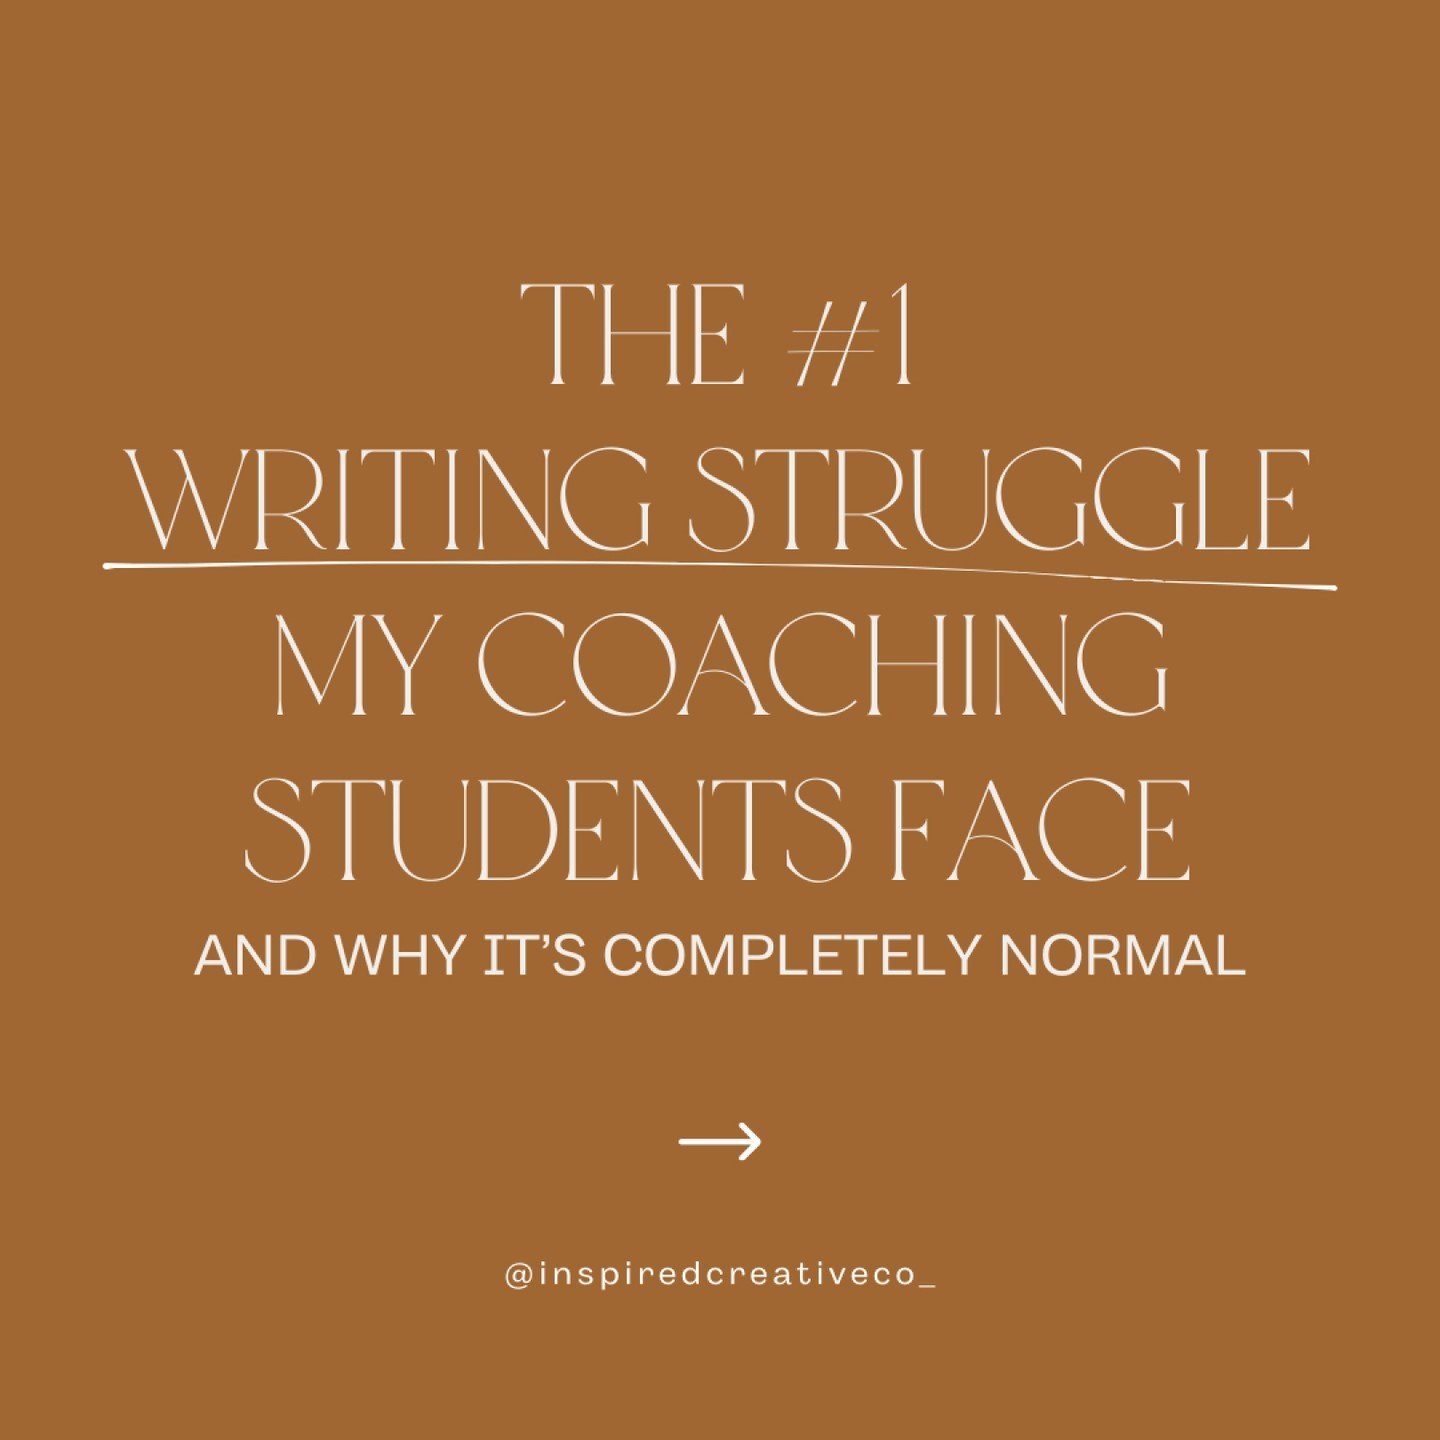 Here's what my coaching students struggle with (and it's totally normal) 👉

I absolutely ADORE coaching. Being able to work so closely and collaboratively with my writers brings me so much joy. It's also so helpful for *them* to receive such focused